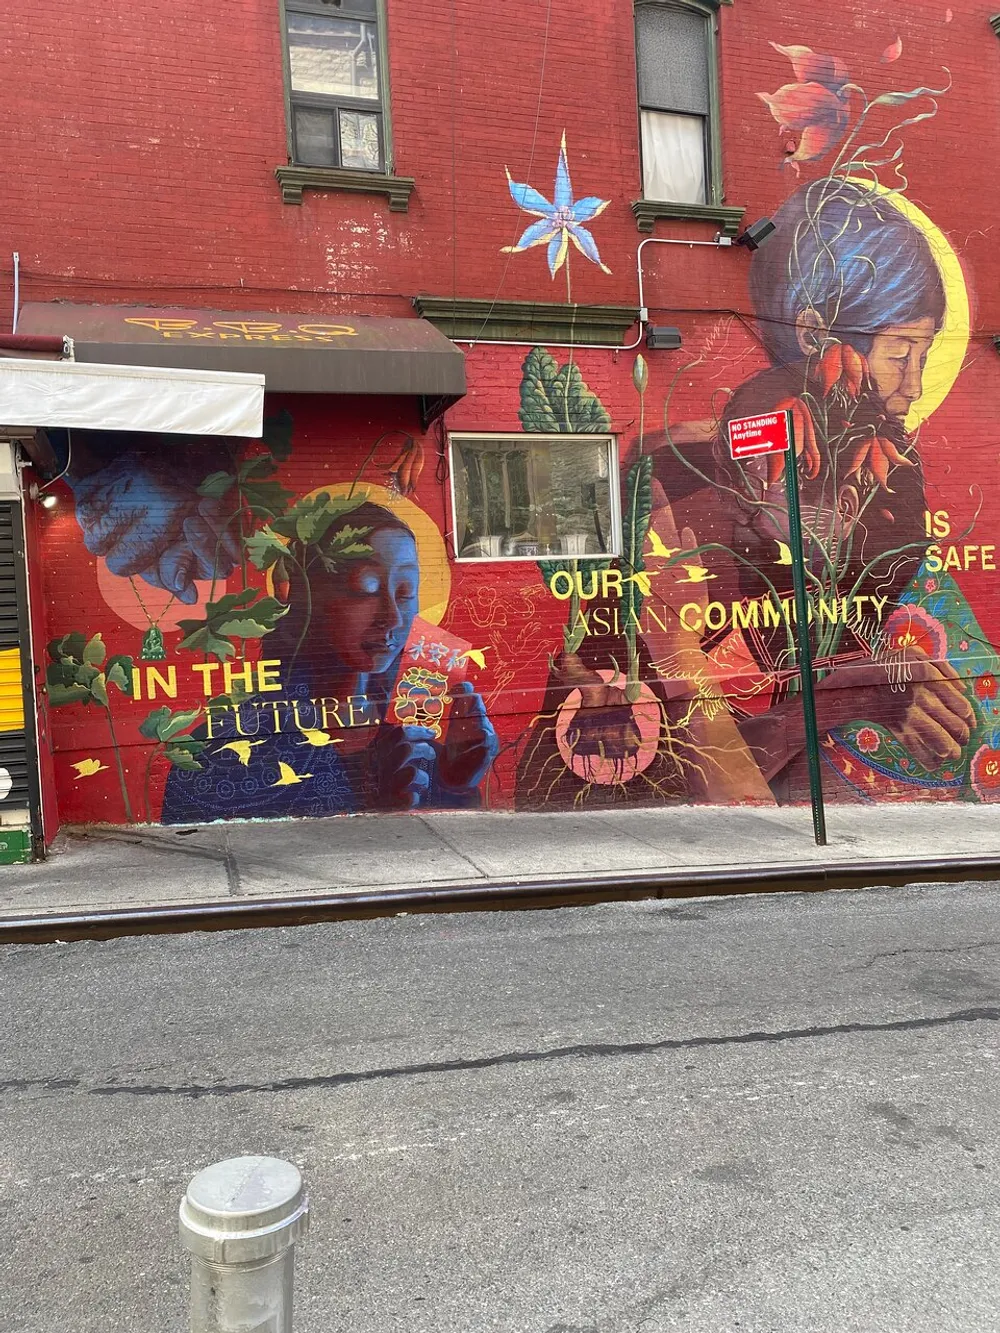 The image shows a vibrant street mural with floral and human imagery and text that reads IN THE FUTURE OUR ASIAN COMMUNITY IS SAFE on the side of a red building